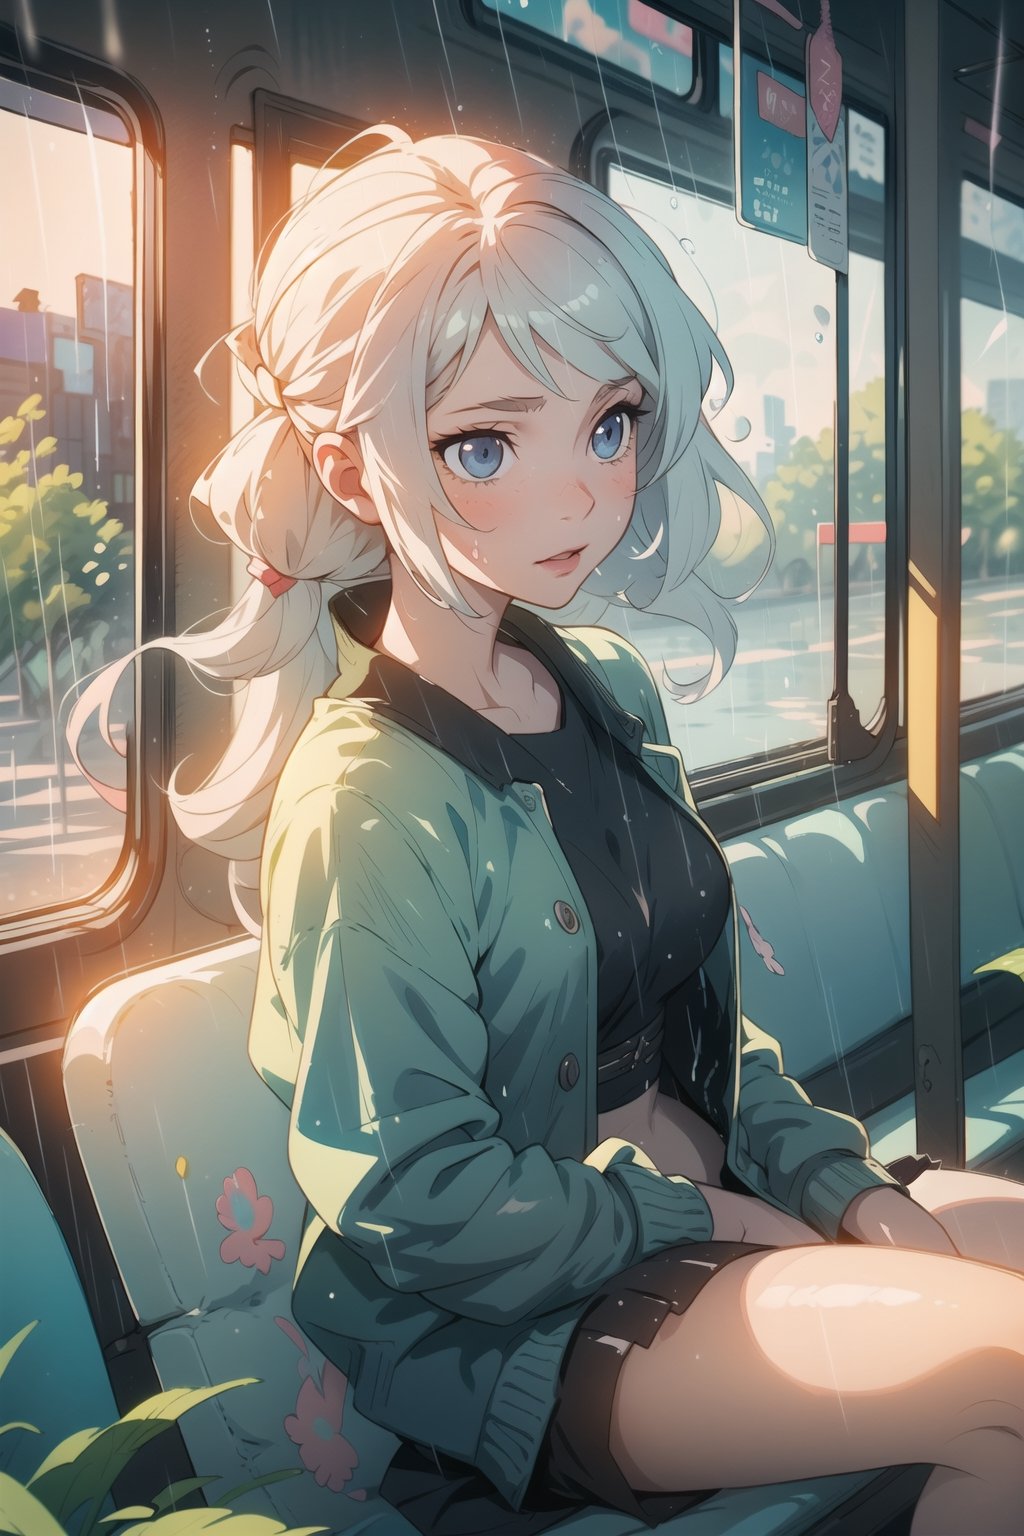 A whimsical anime portrayal of a Gen-Z girl with eclectic style, listening to music on a (((public bus))) during a rainy day. The raindrops create a dreamy atmosphere on the window, adding to the scene's charm. Illustration, watercolor painting, focusing on the girl's reflection and the rain-sprinkled glass